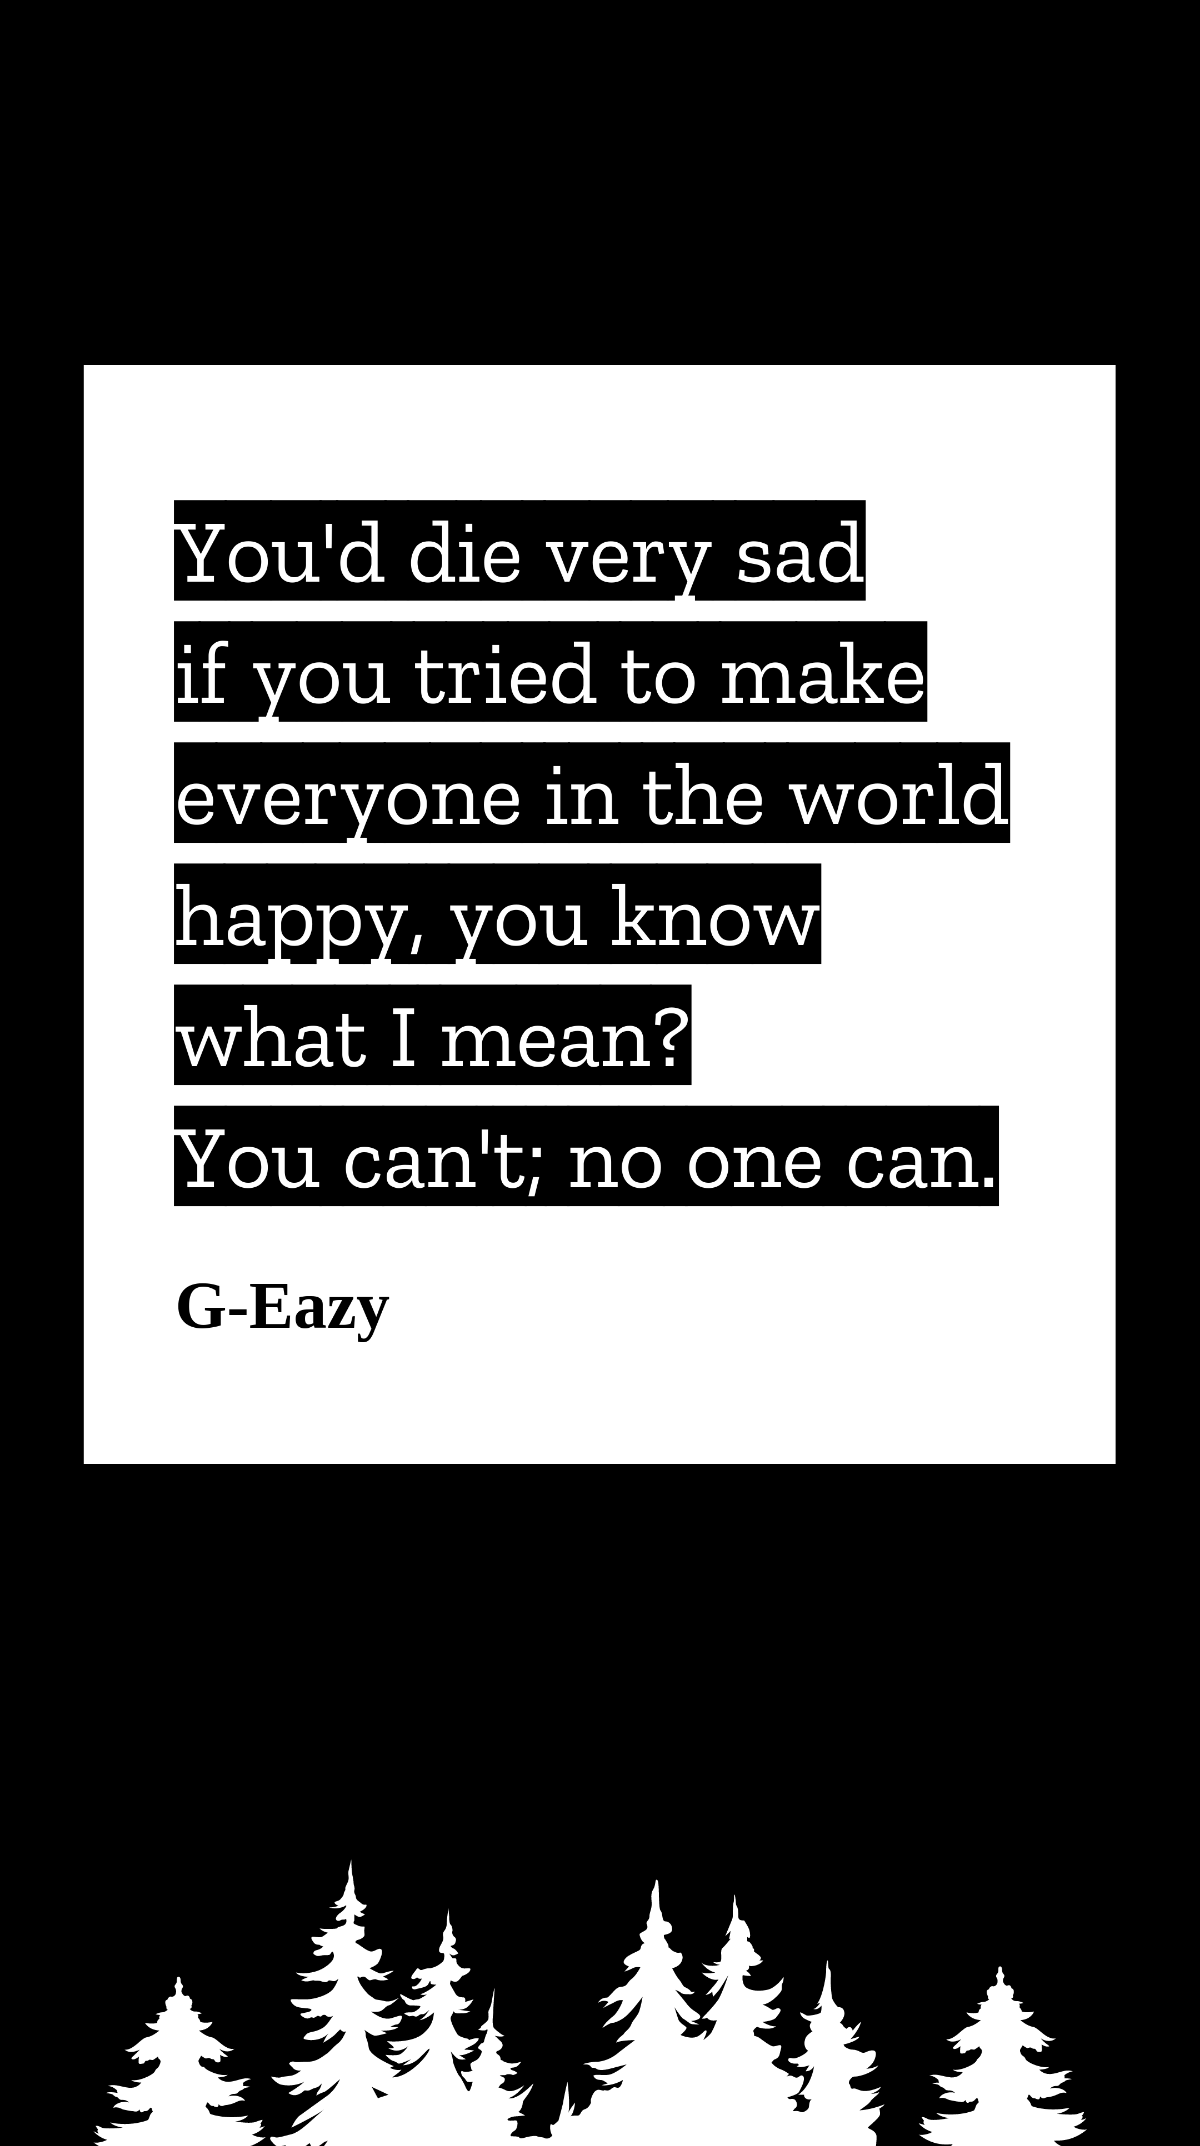 G-Eazy - You'd die very sad if you tried to make everyone in the world happy, you know what I mean? You can't; no one can. Template